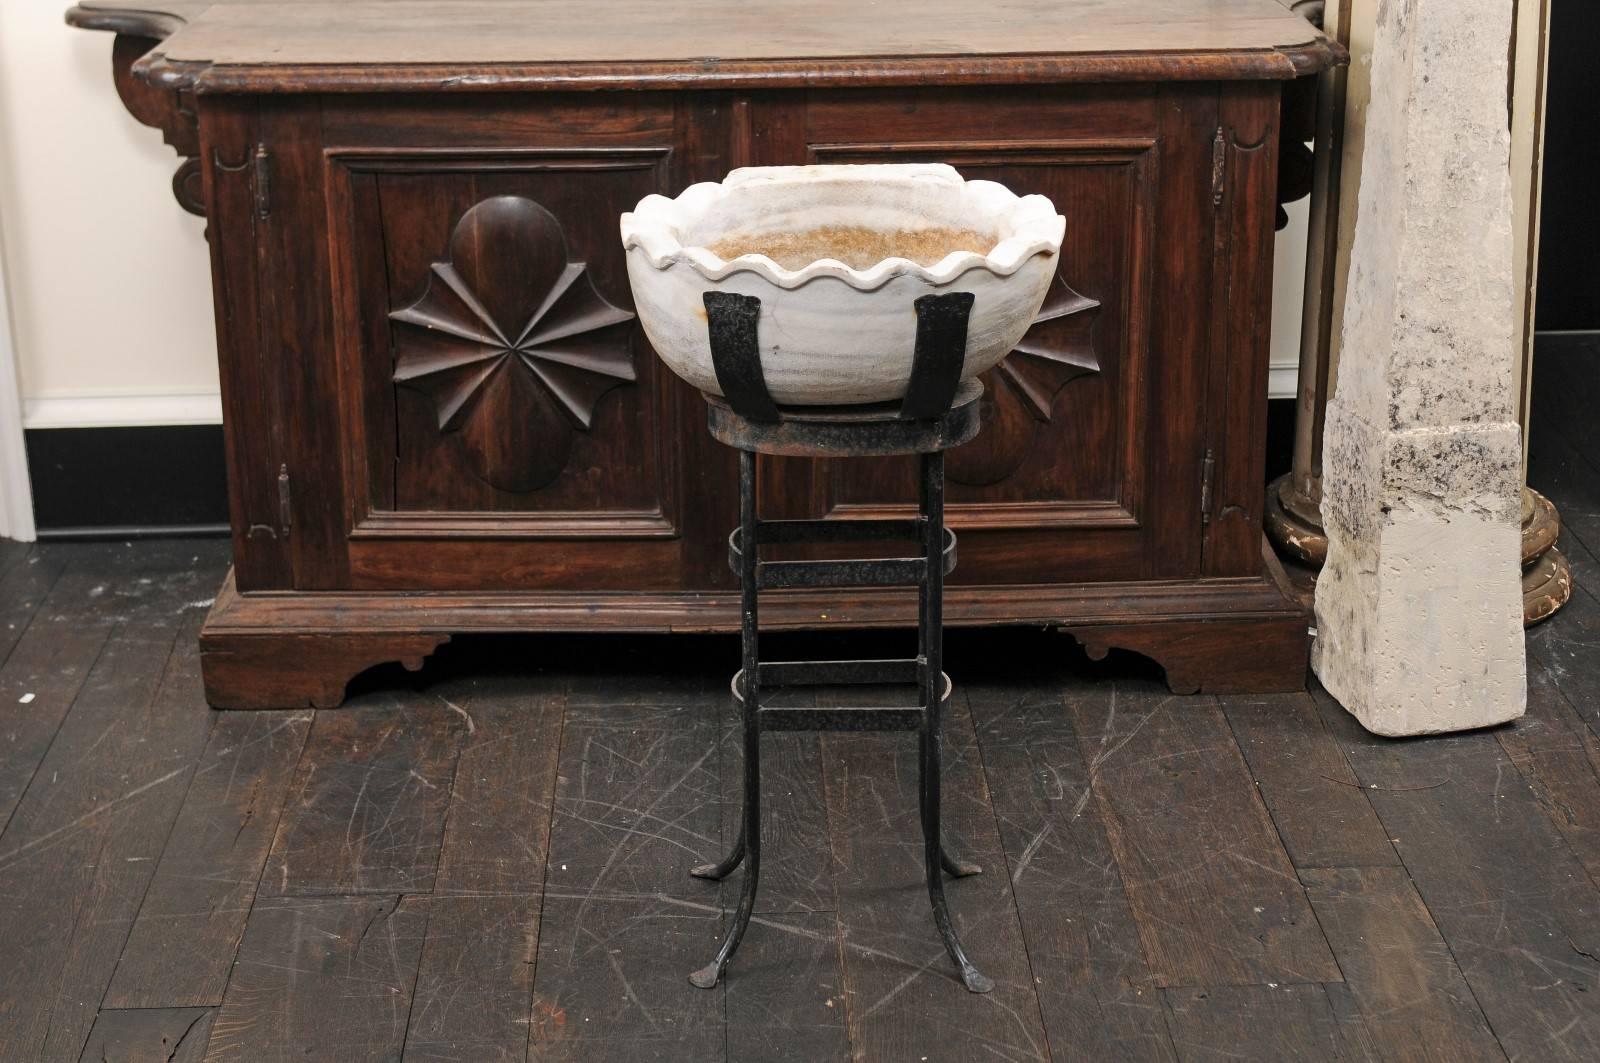 Patinated 19th Century Italian Marble Sink on Metal Stand Originally Used for Holy Water